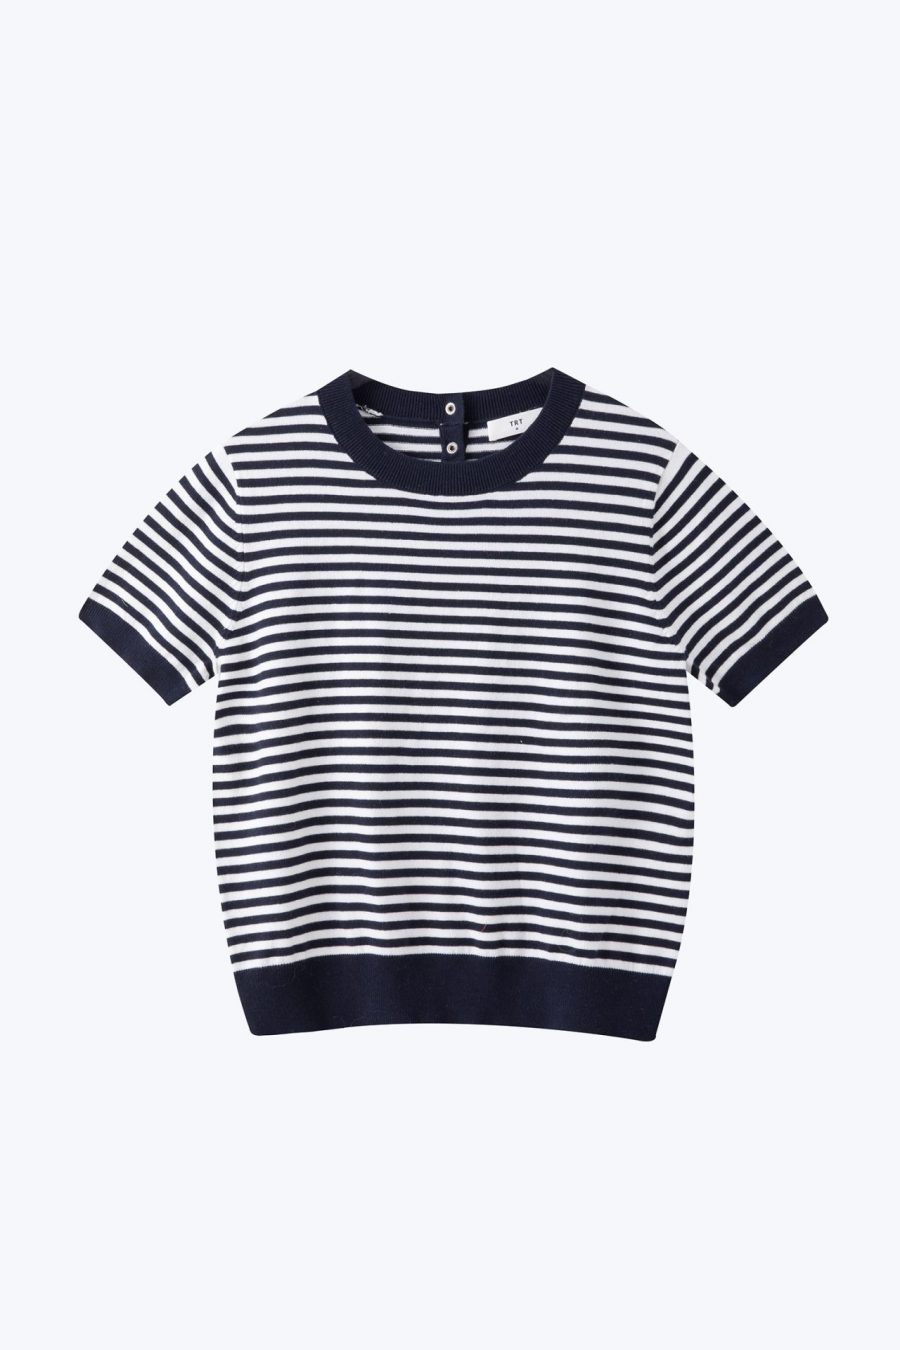 CK001034S Knitted Striped Top NAVY STRIPES